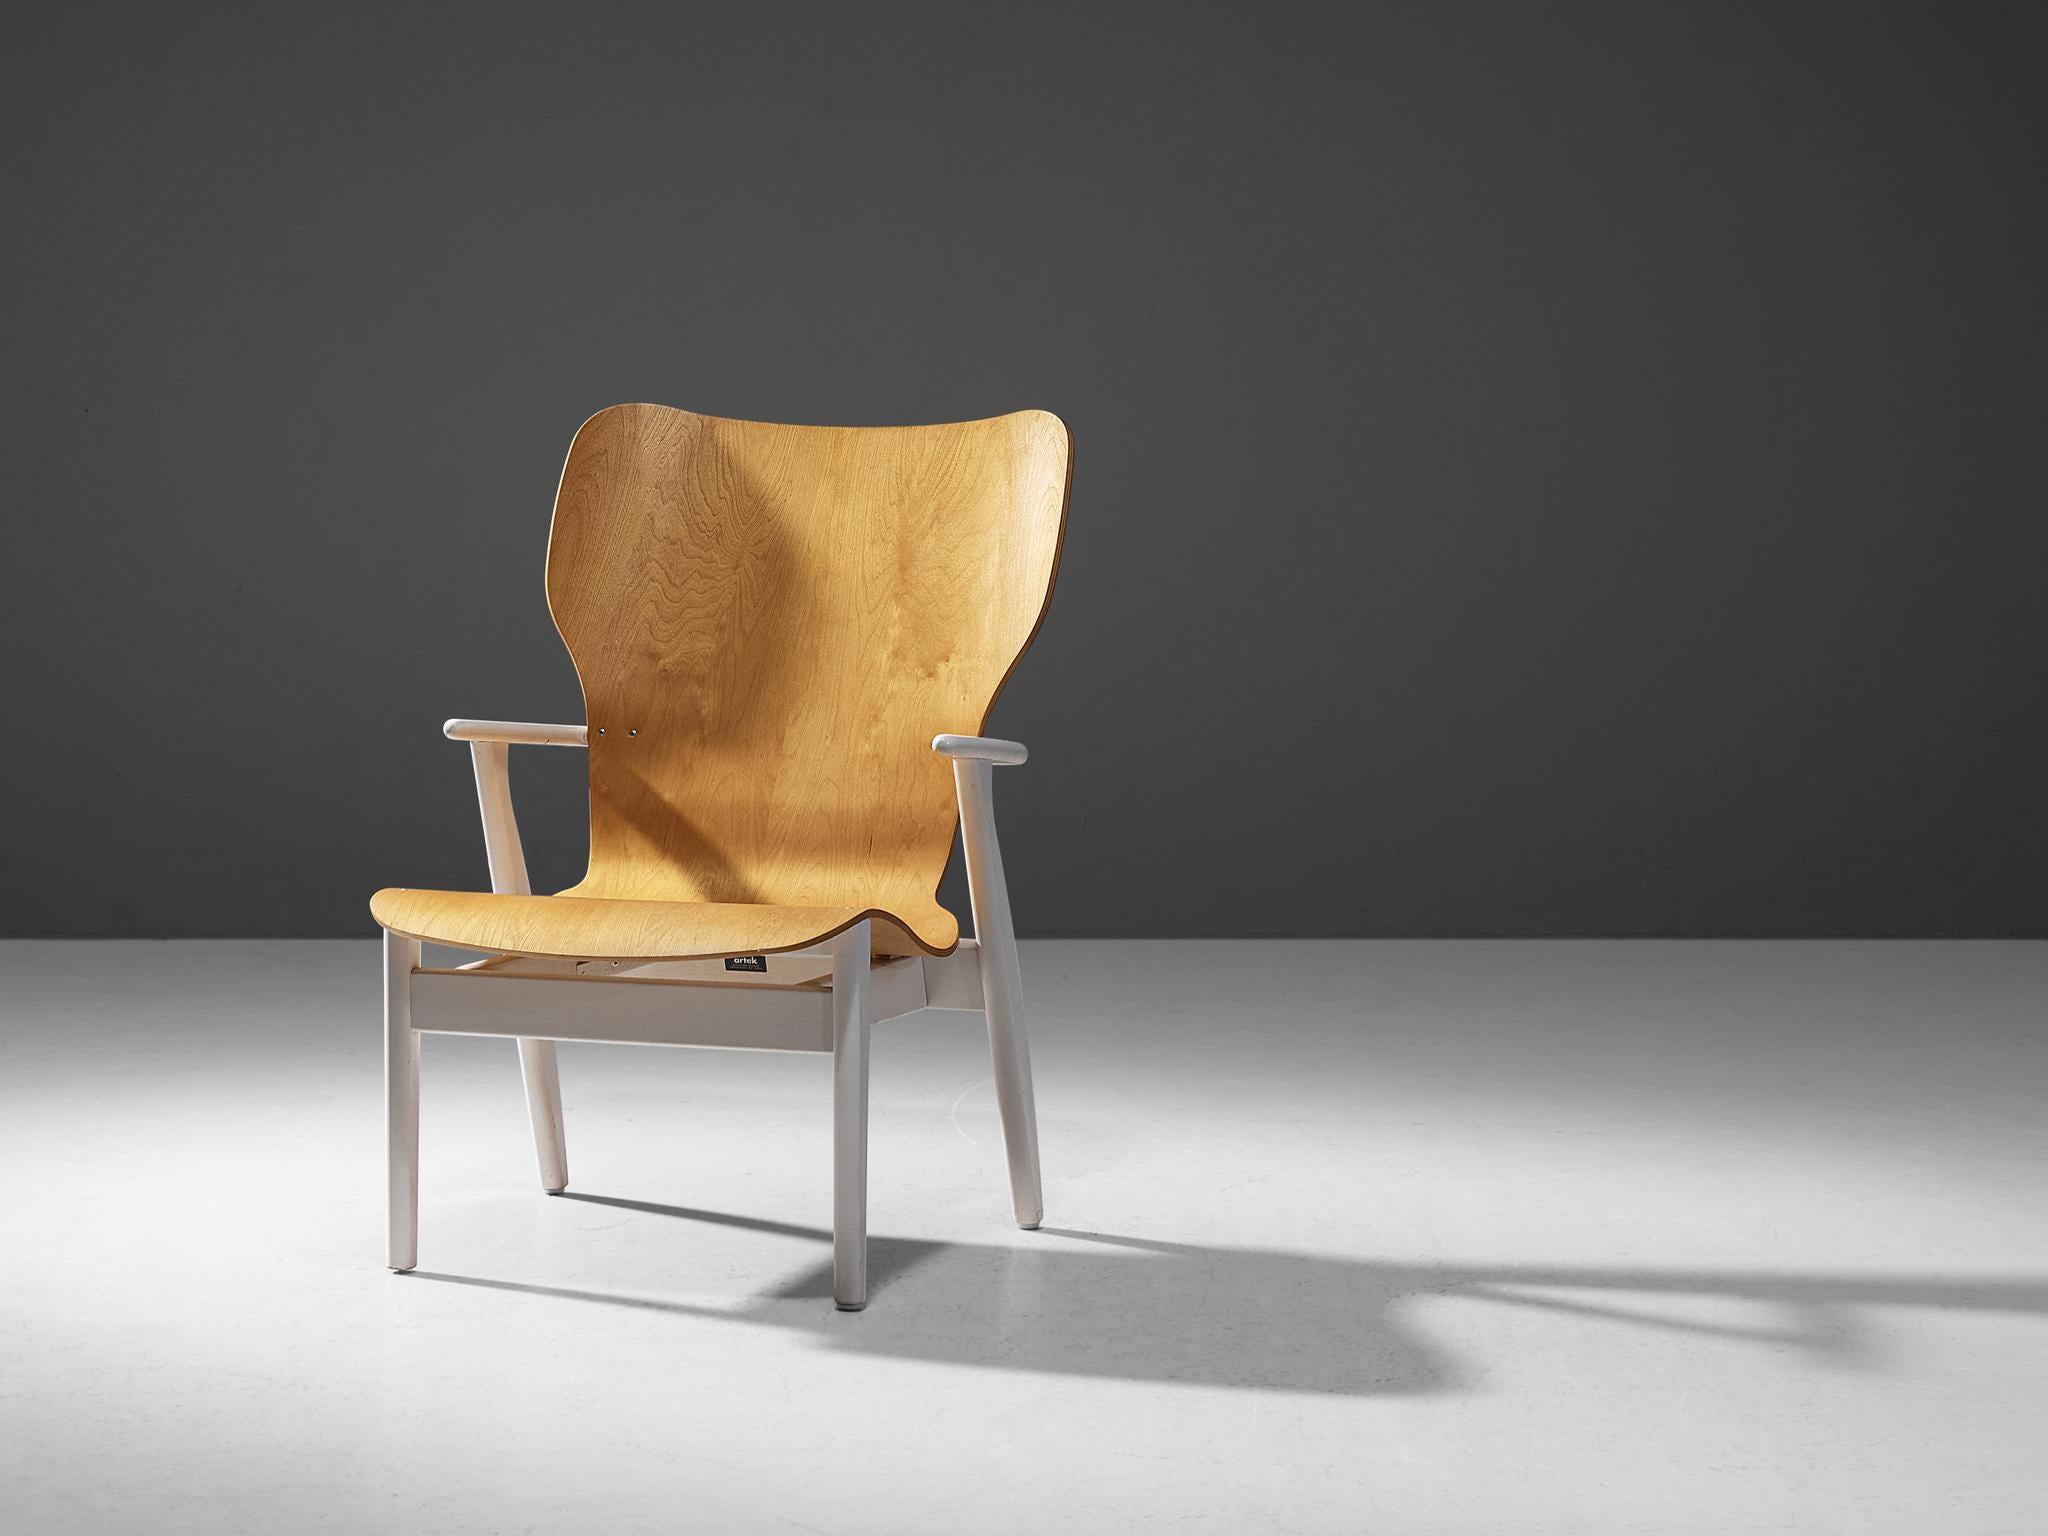 Ilmari Tapiovaara for Artek, lounge chair model 'Domus Lux', lacquered wood, birch, Finland, designed in 1948, recent production. 

This wonderfully sculpted lounge chair is characterized by organic lines combined with sturdy shapes. Interesting